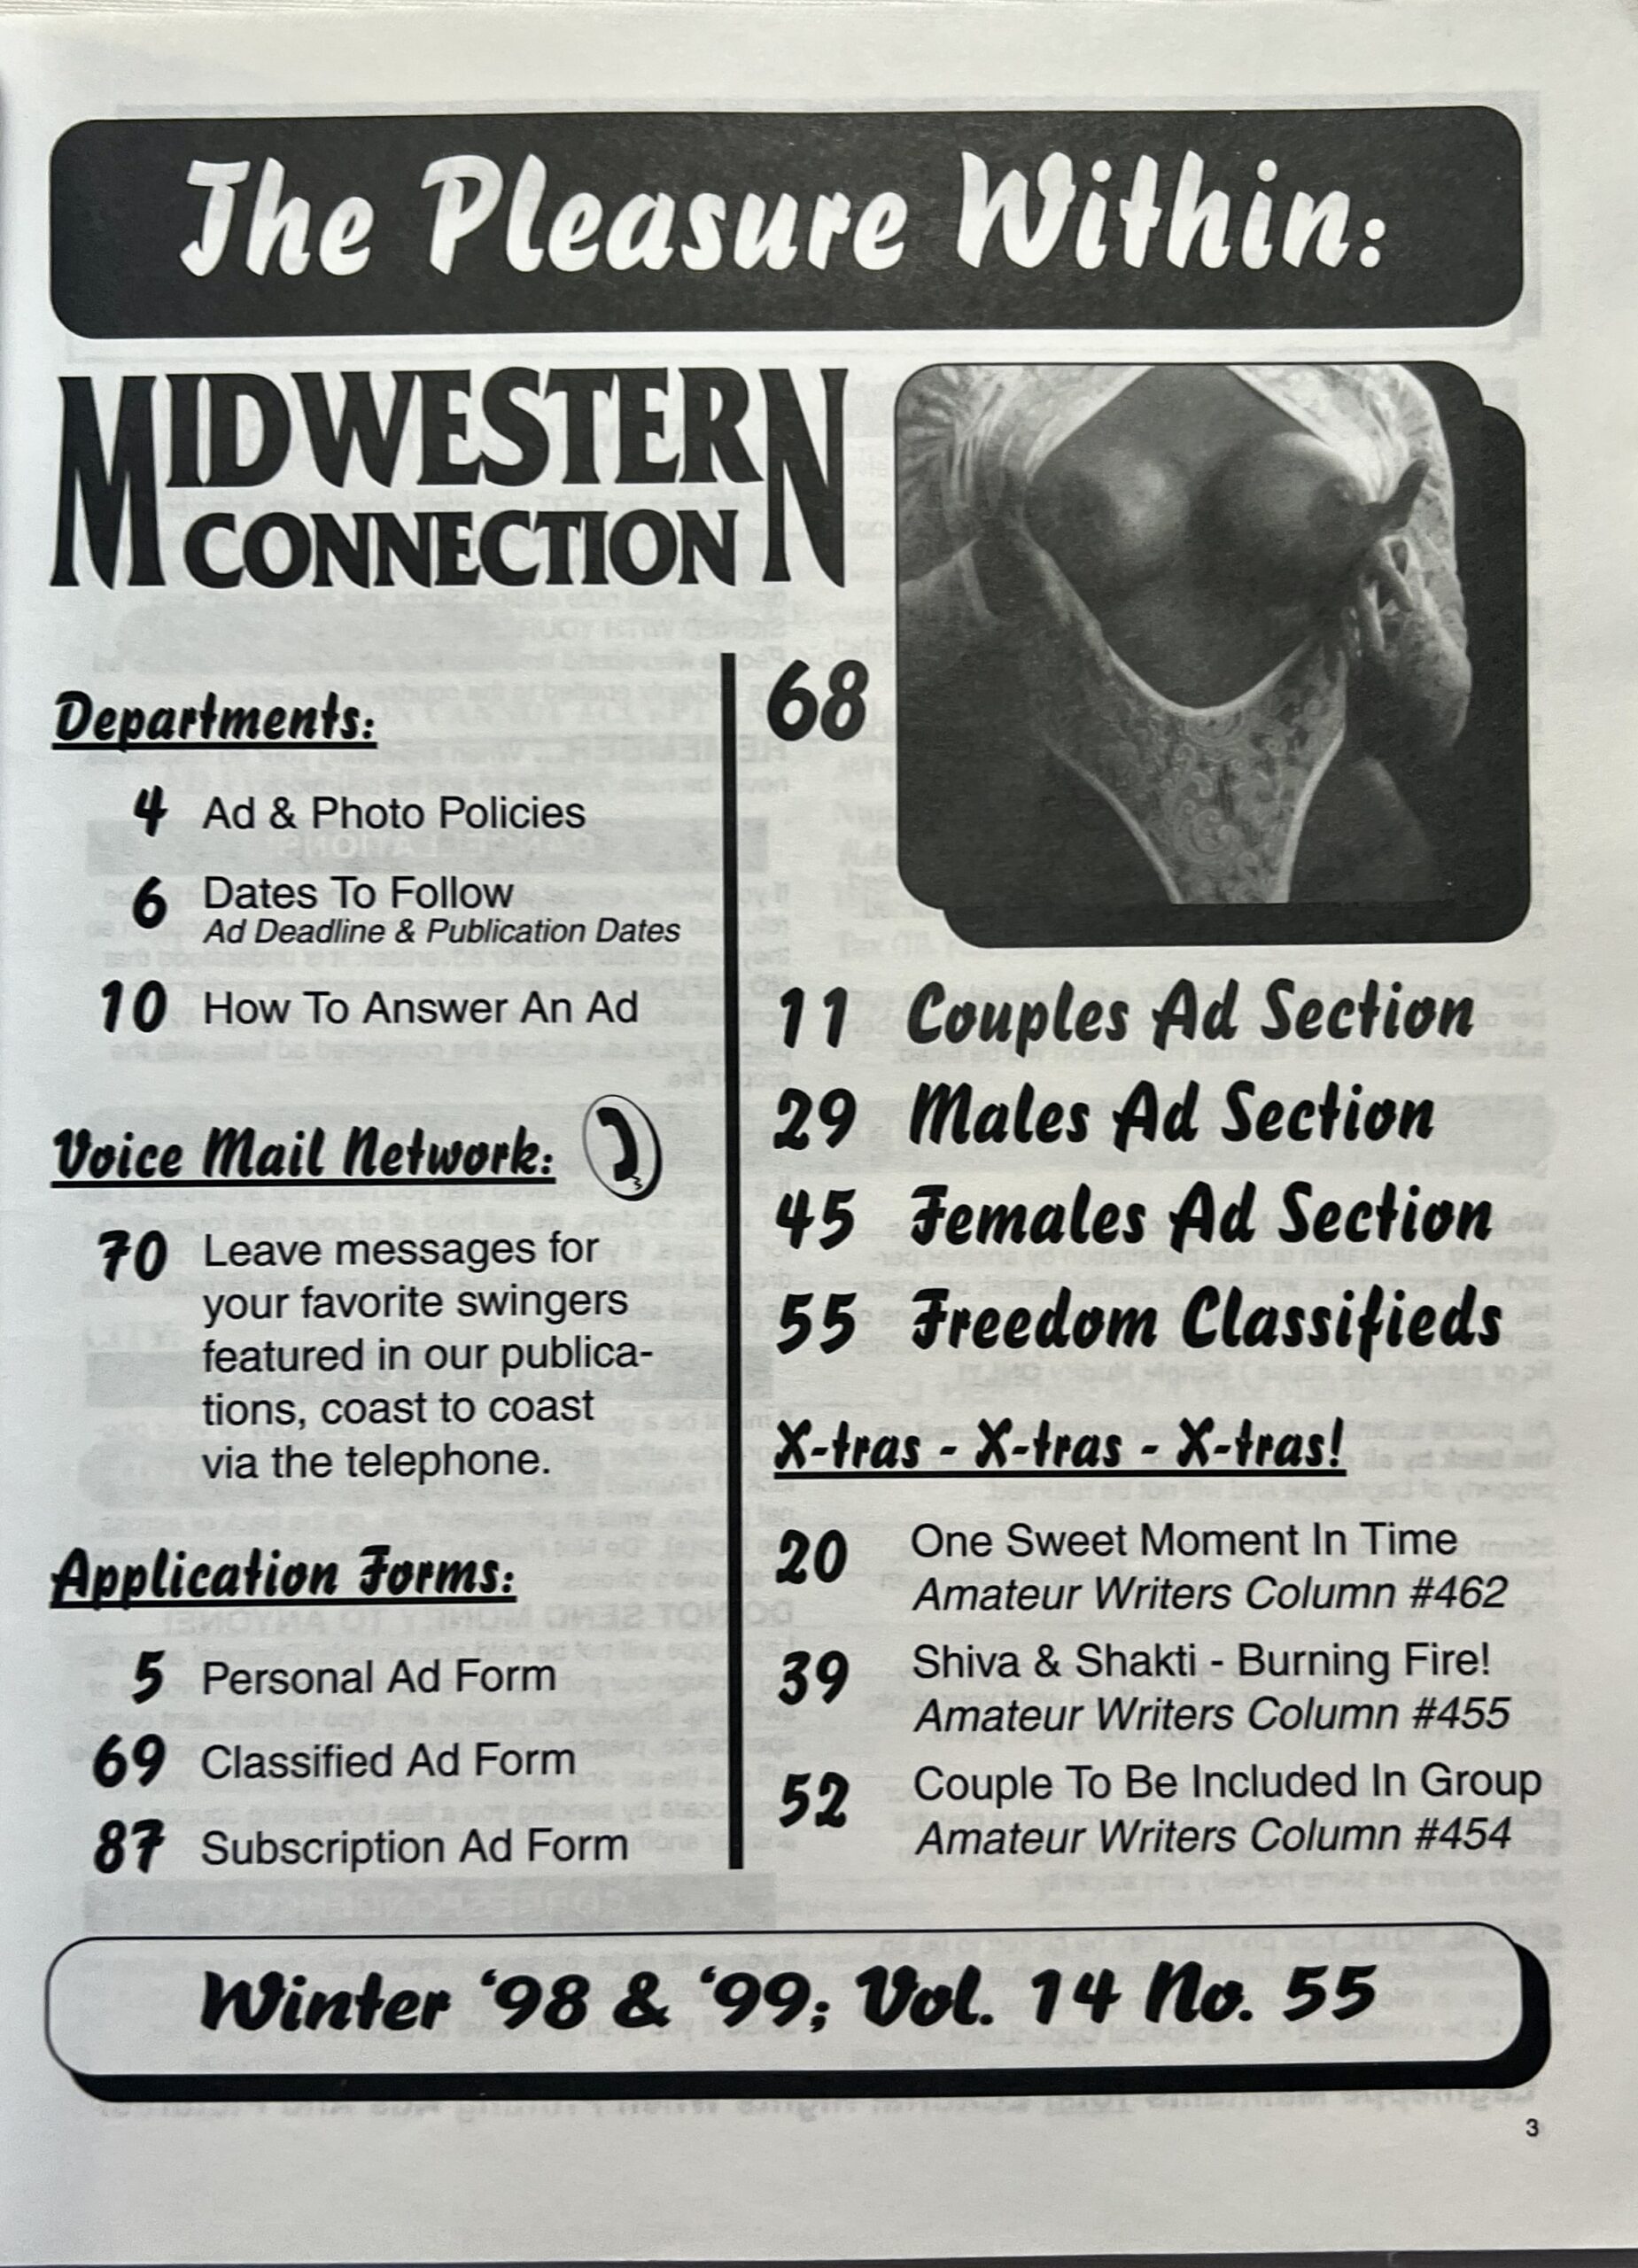 Mid Western Connection 17/66 December 1998 Swingers and Personals Magazine -Heart Attack- Vintage Magazines 16